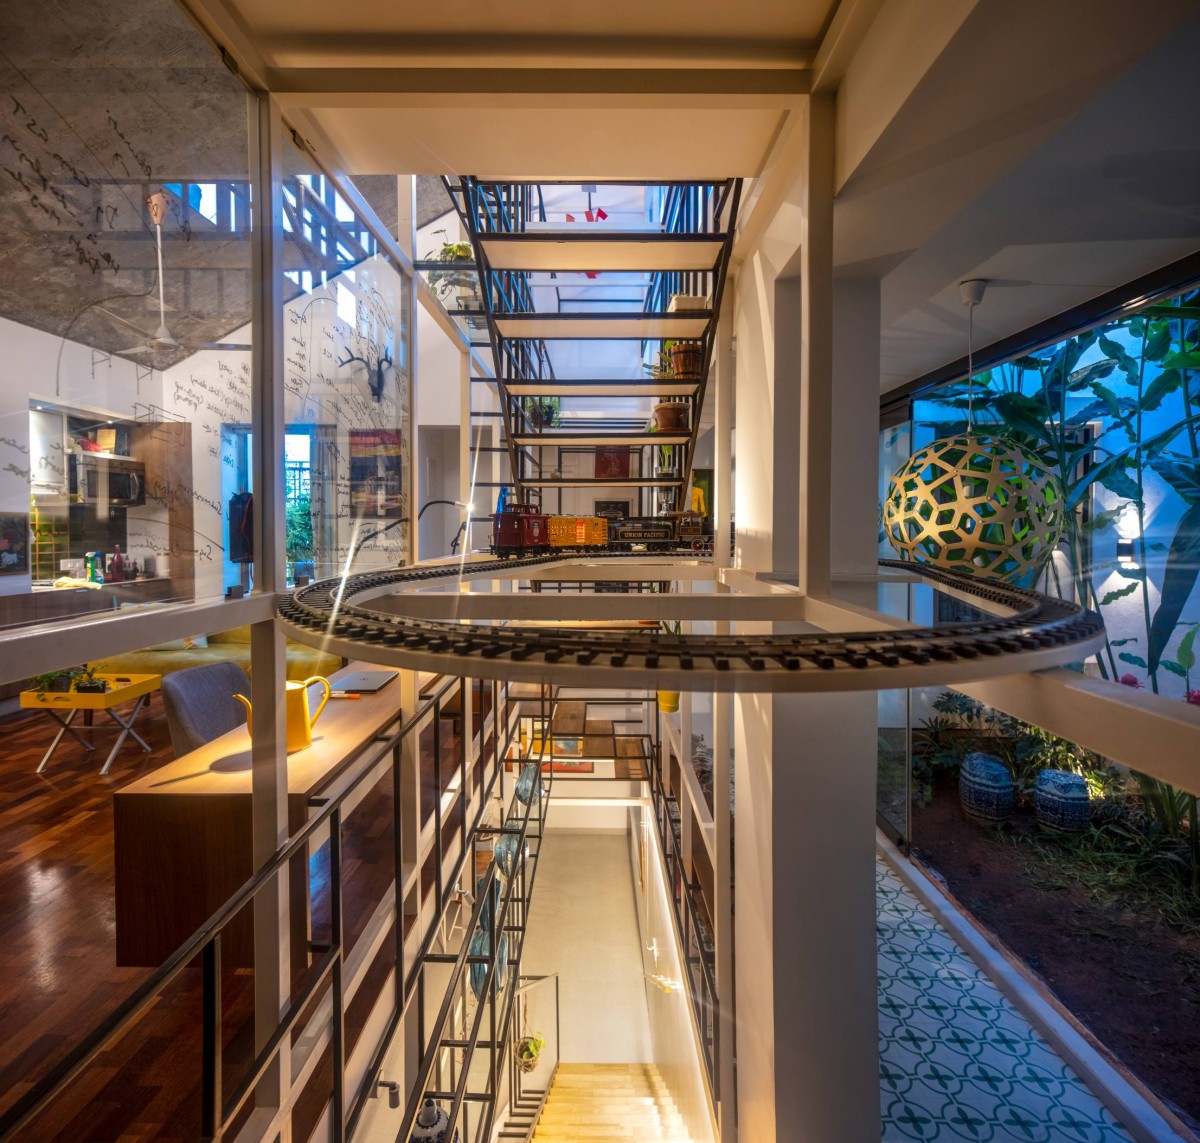 The Central Steel Space and the toy train by Gaurav Roy Choudhury Architects